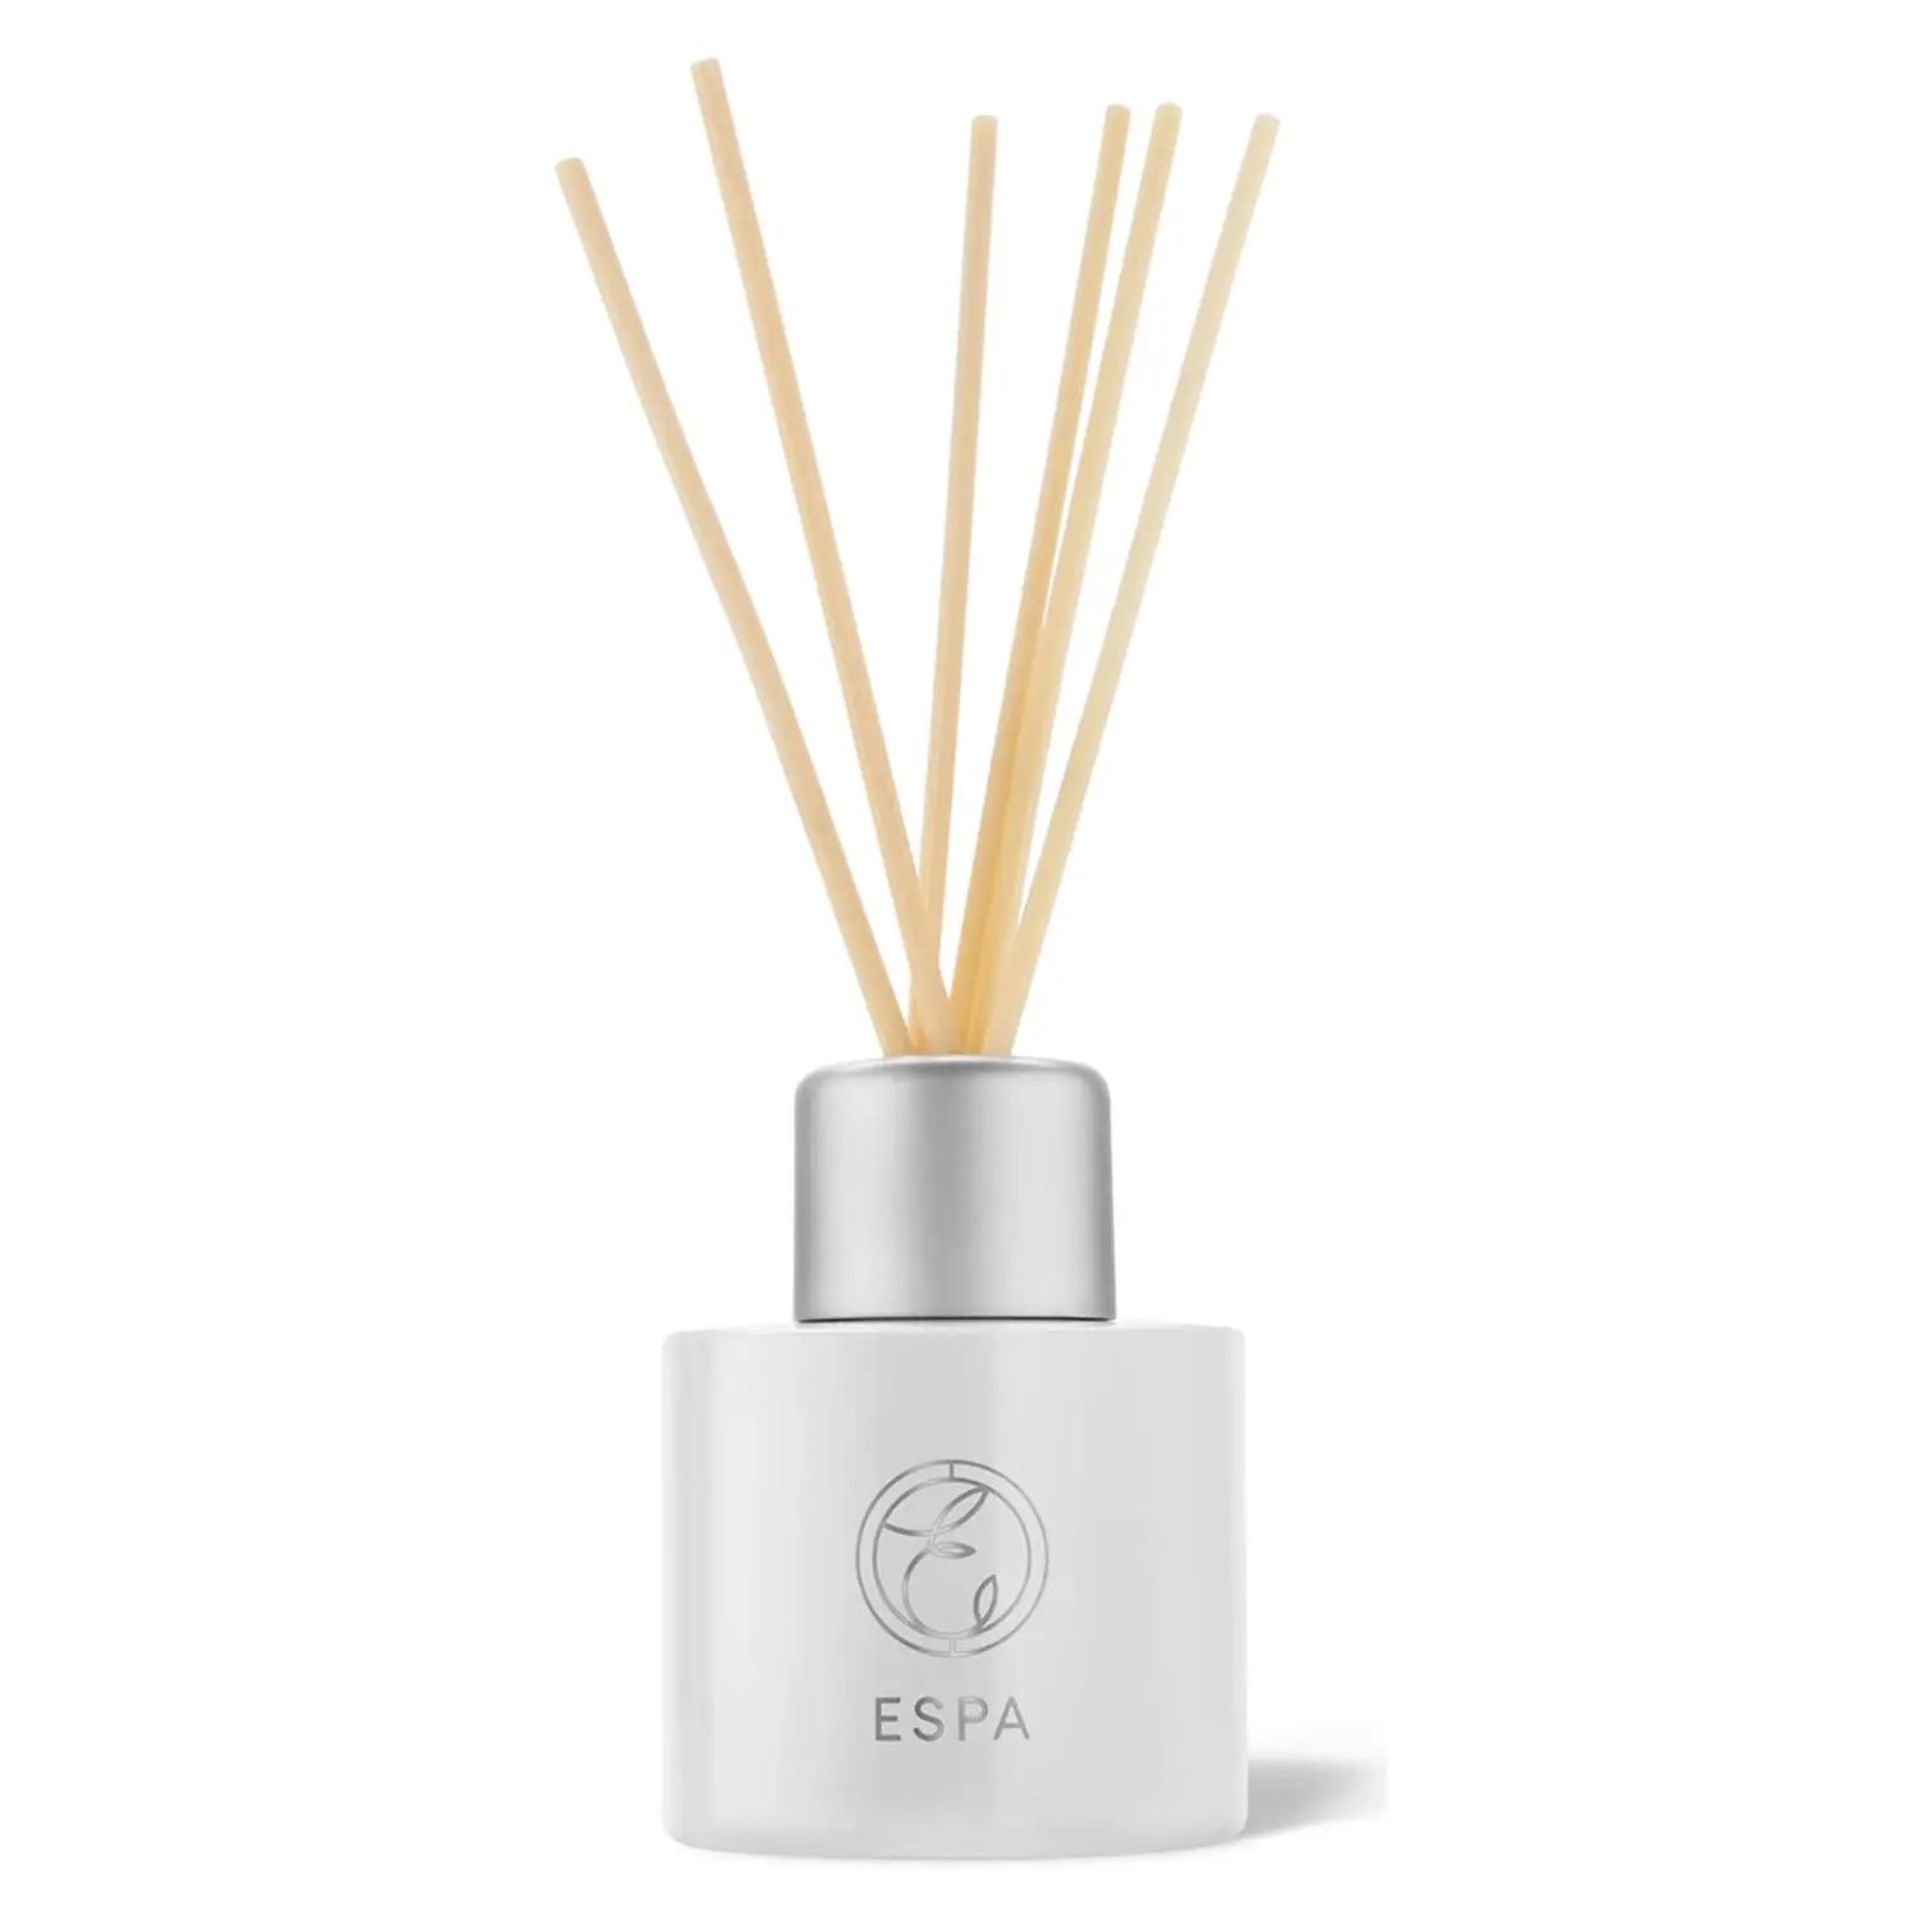 TRADE LOT TO CONTAIN 20x NEW ESPA Positivity Reed Diffuser 200ml. RRP £48 EACH. (R12-14/16). When